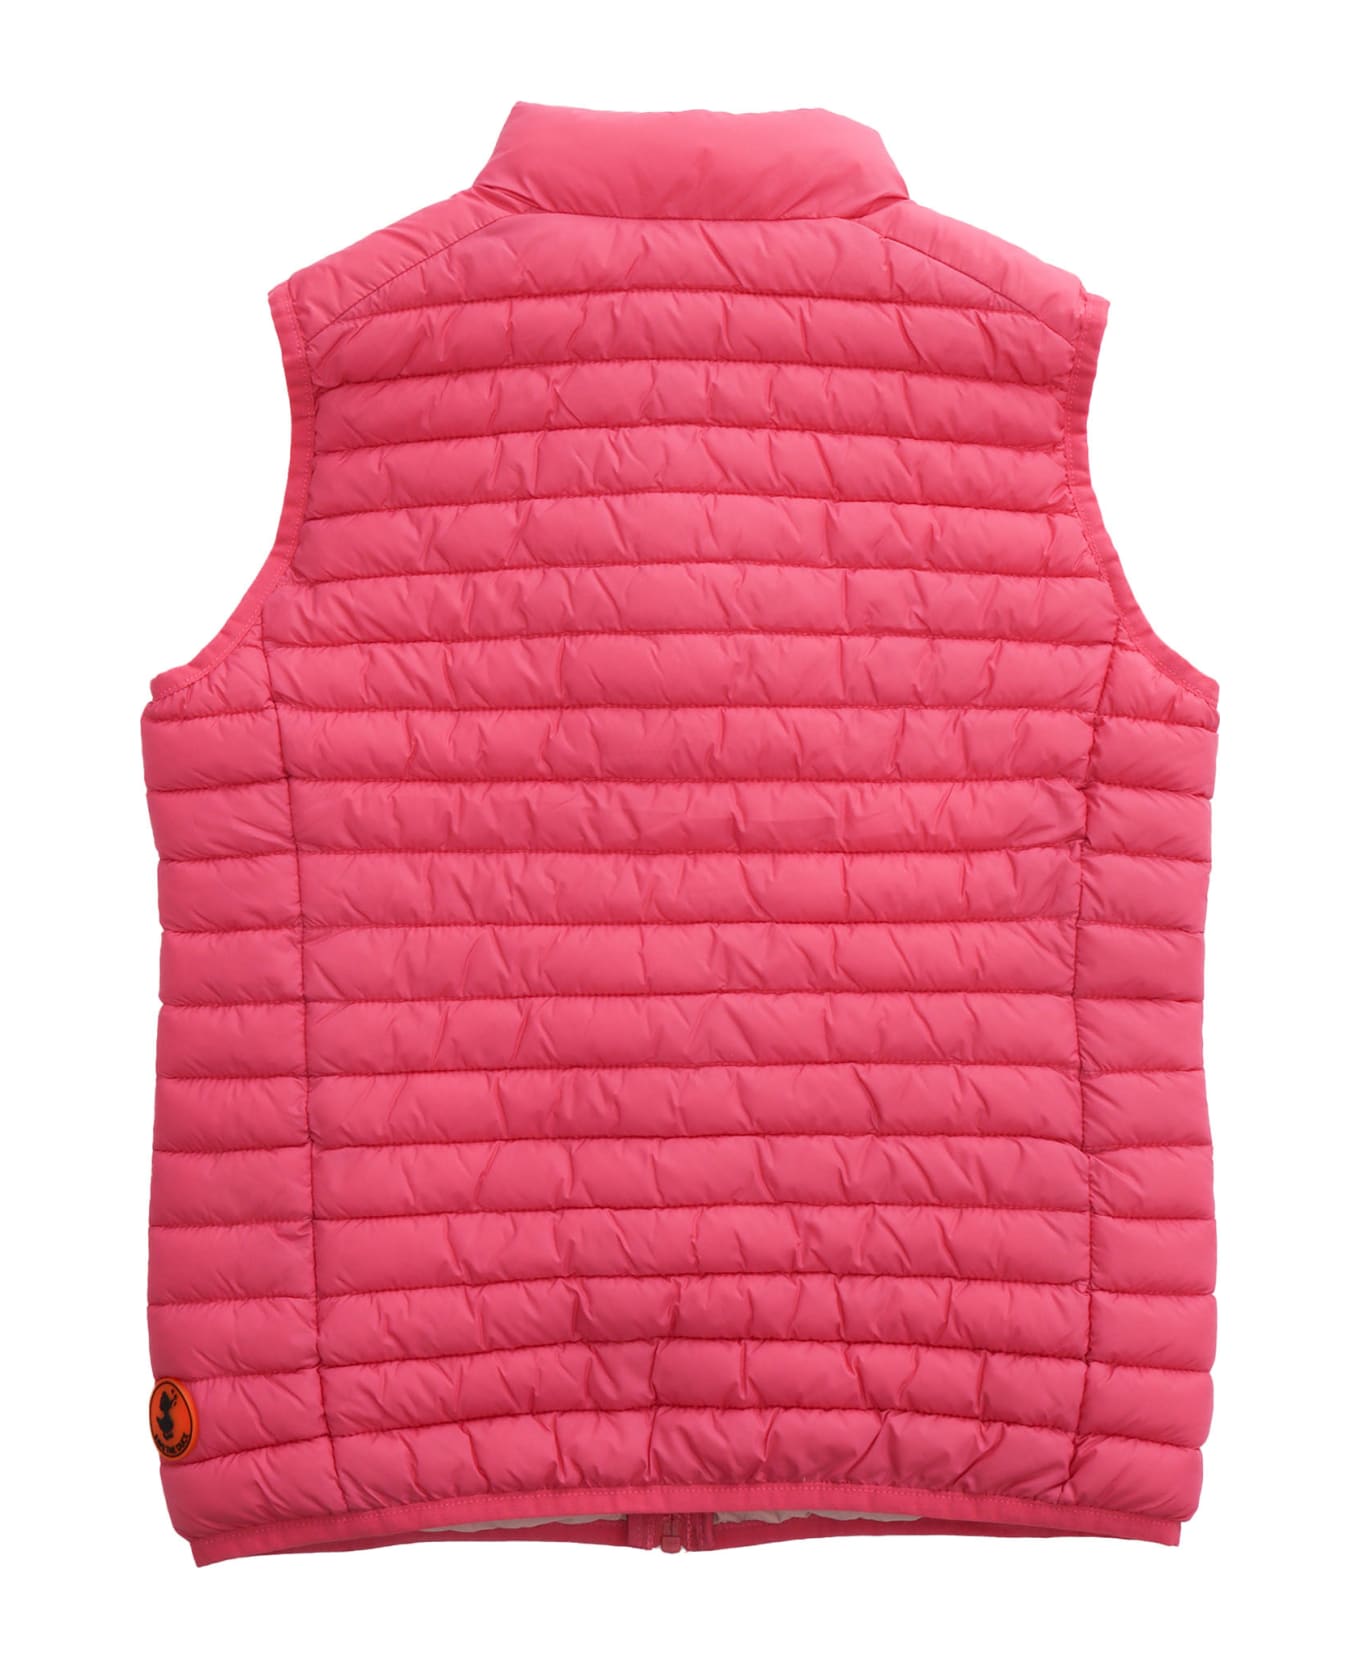 Save the Duck Dolin Sleeveless Jacket - PINK